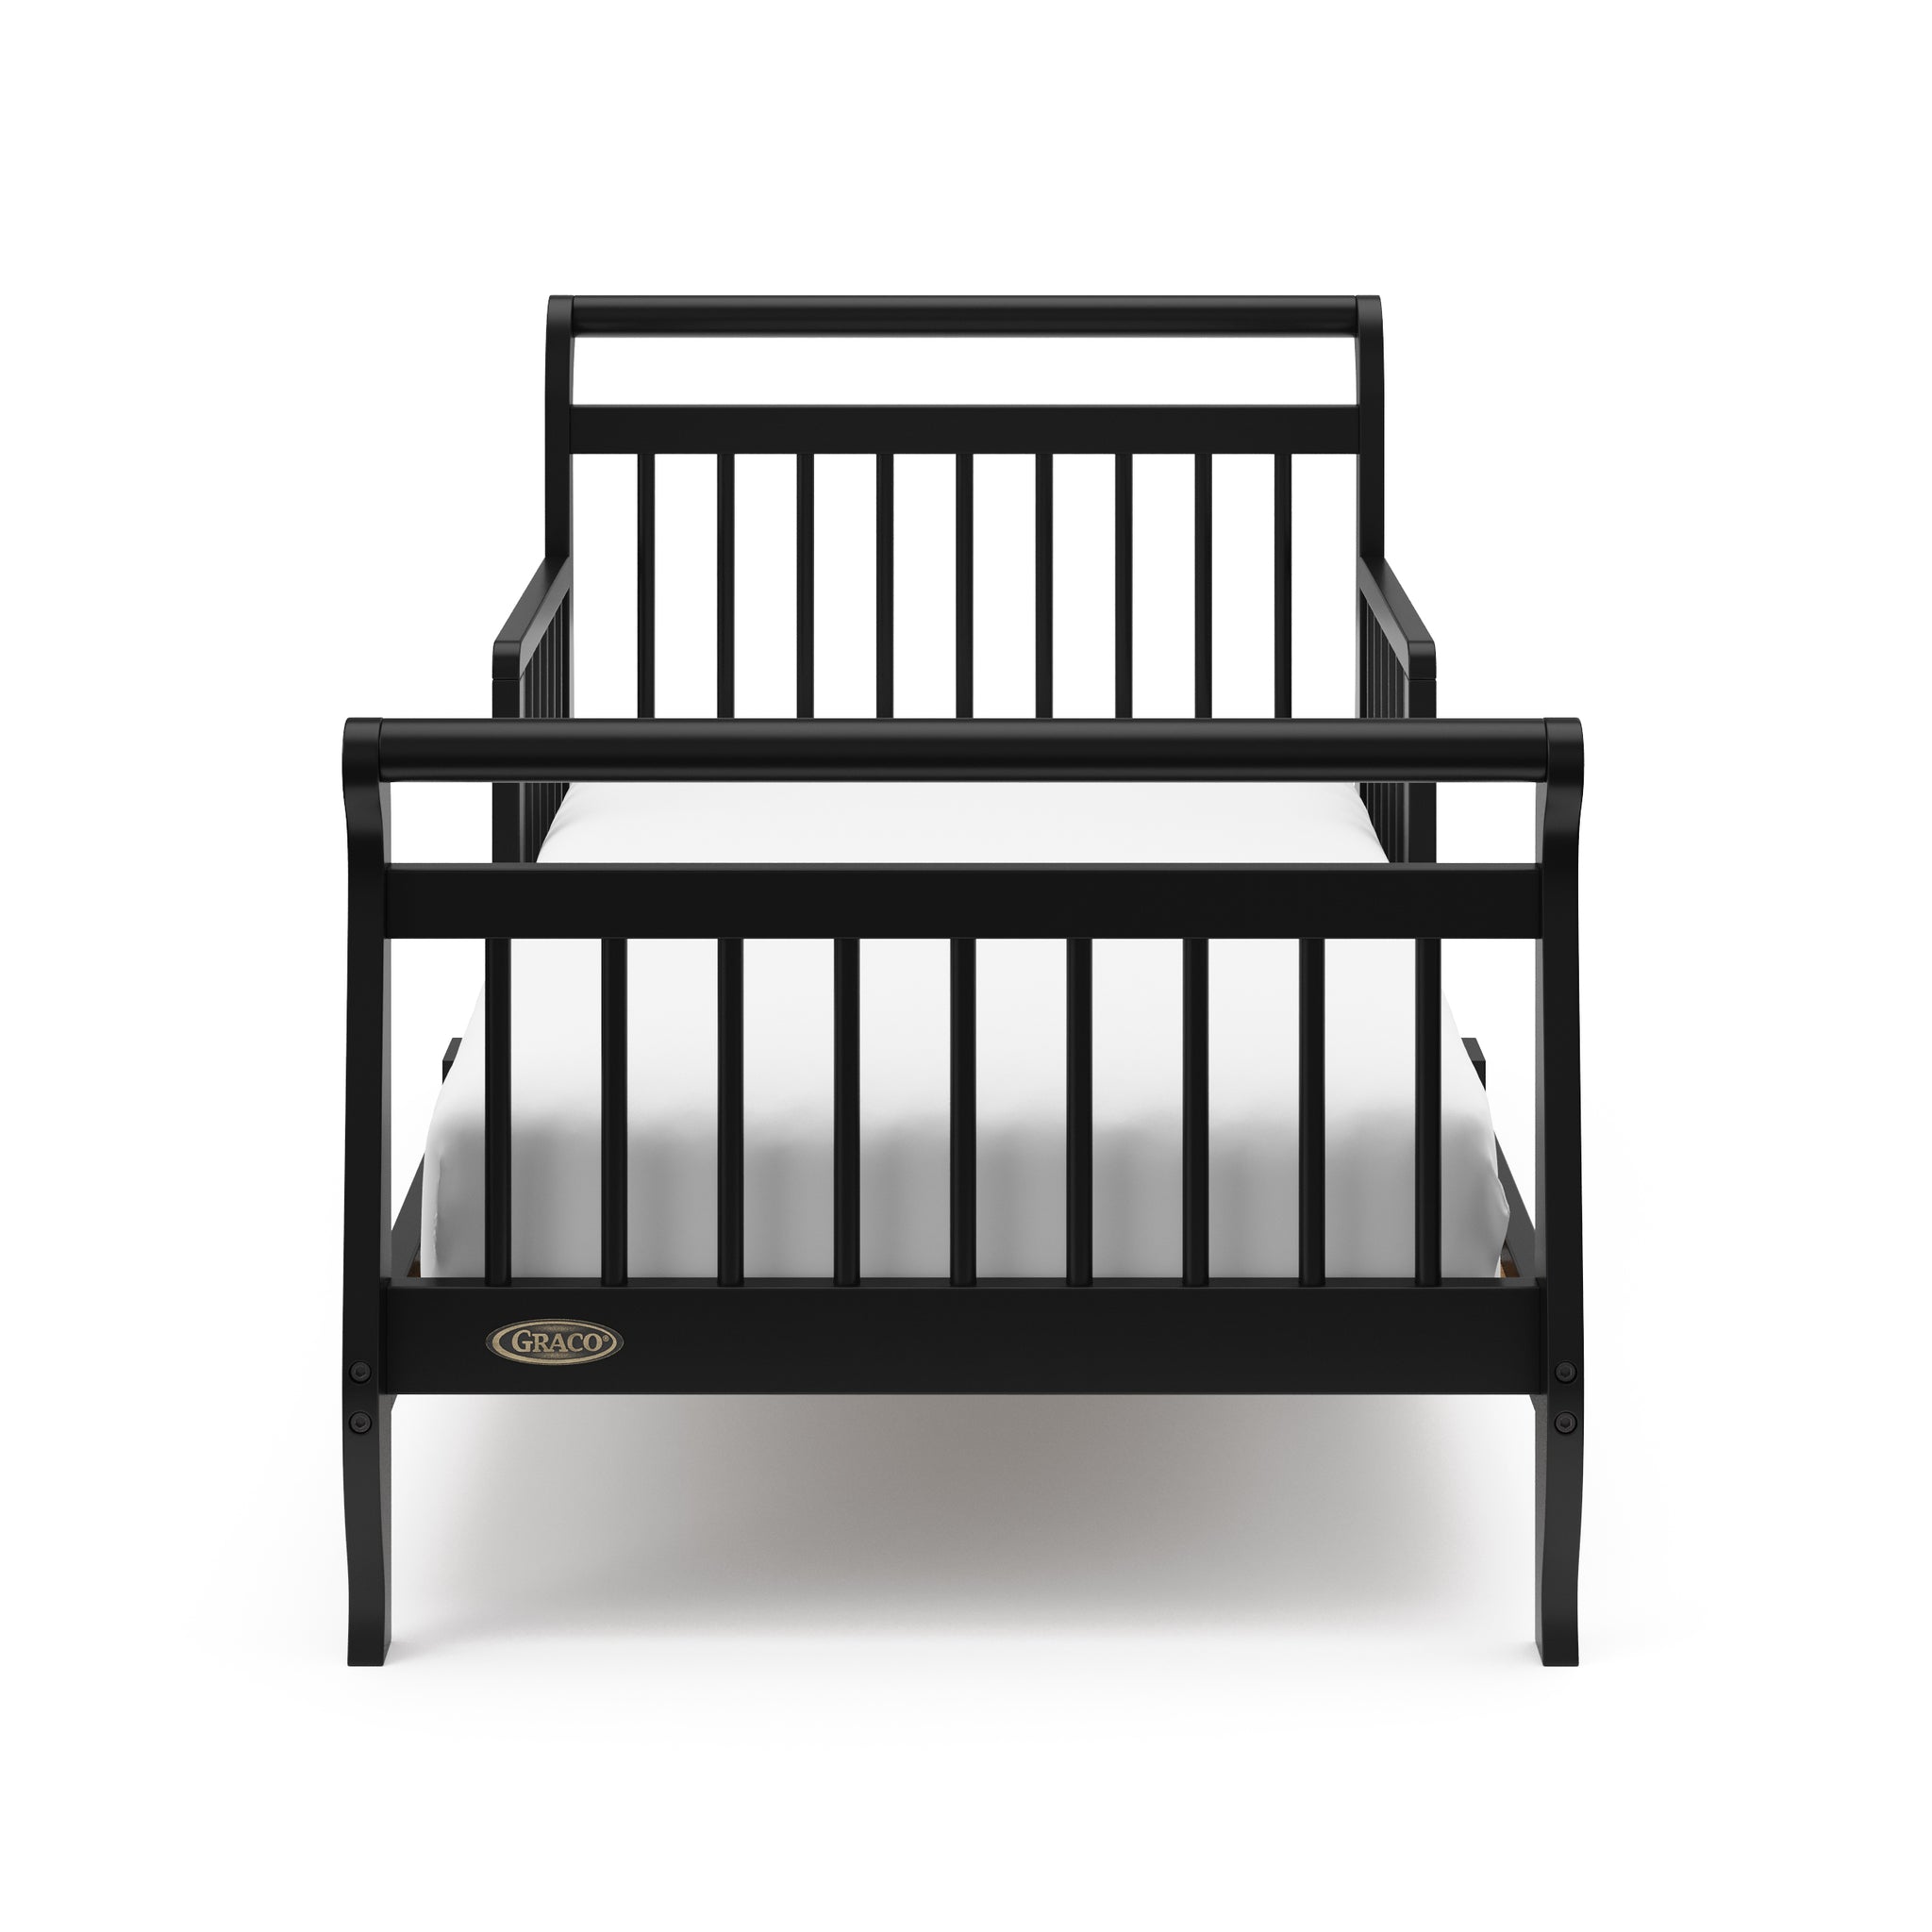 Front view of black toddler bed with guardrails